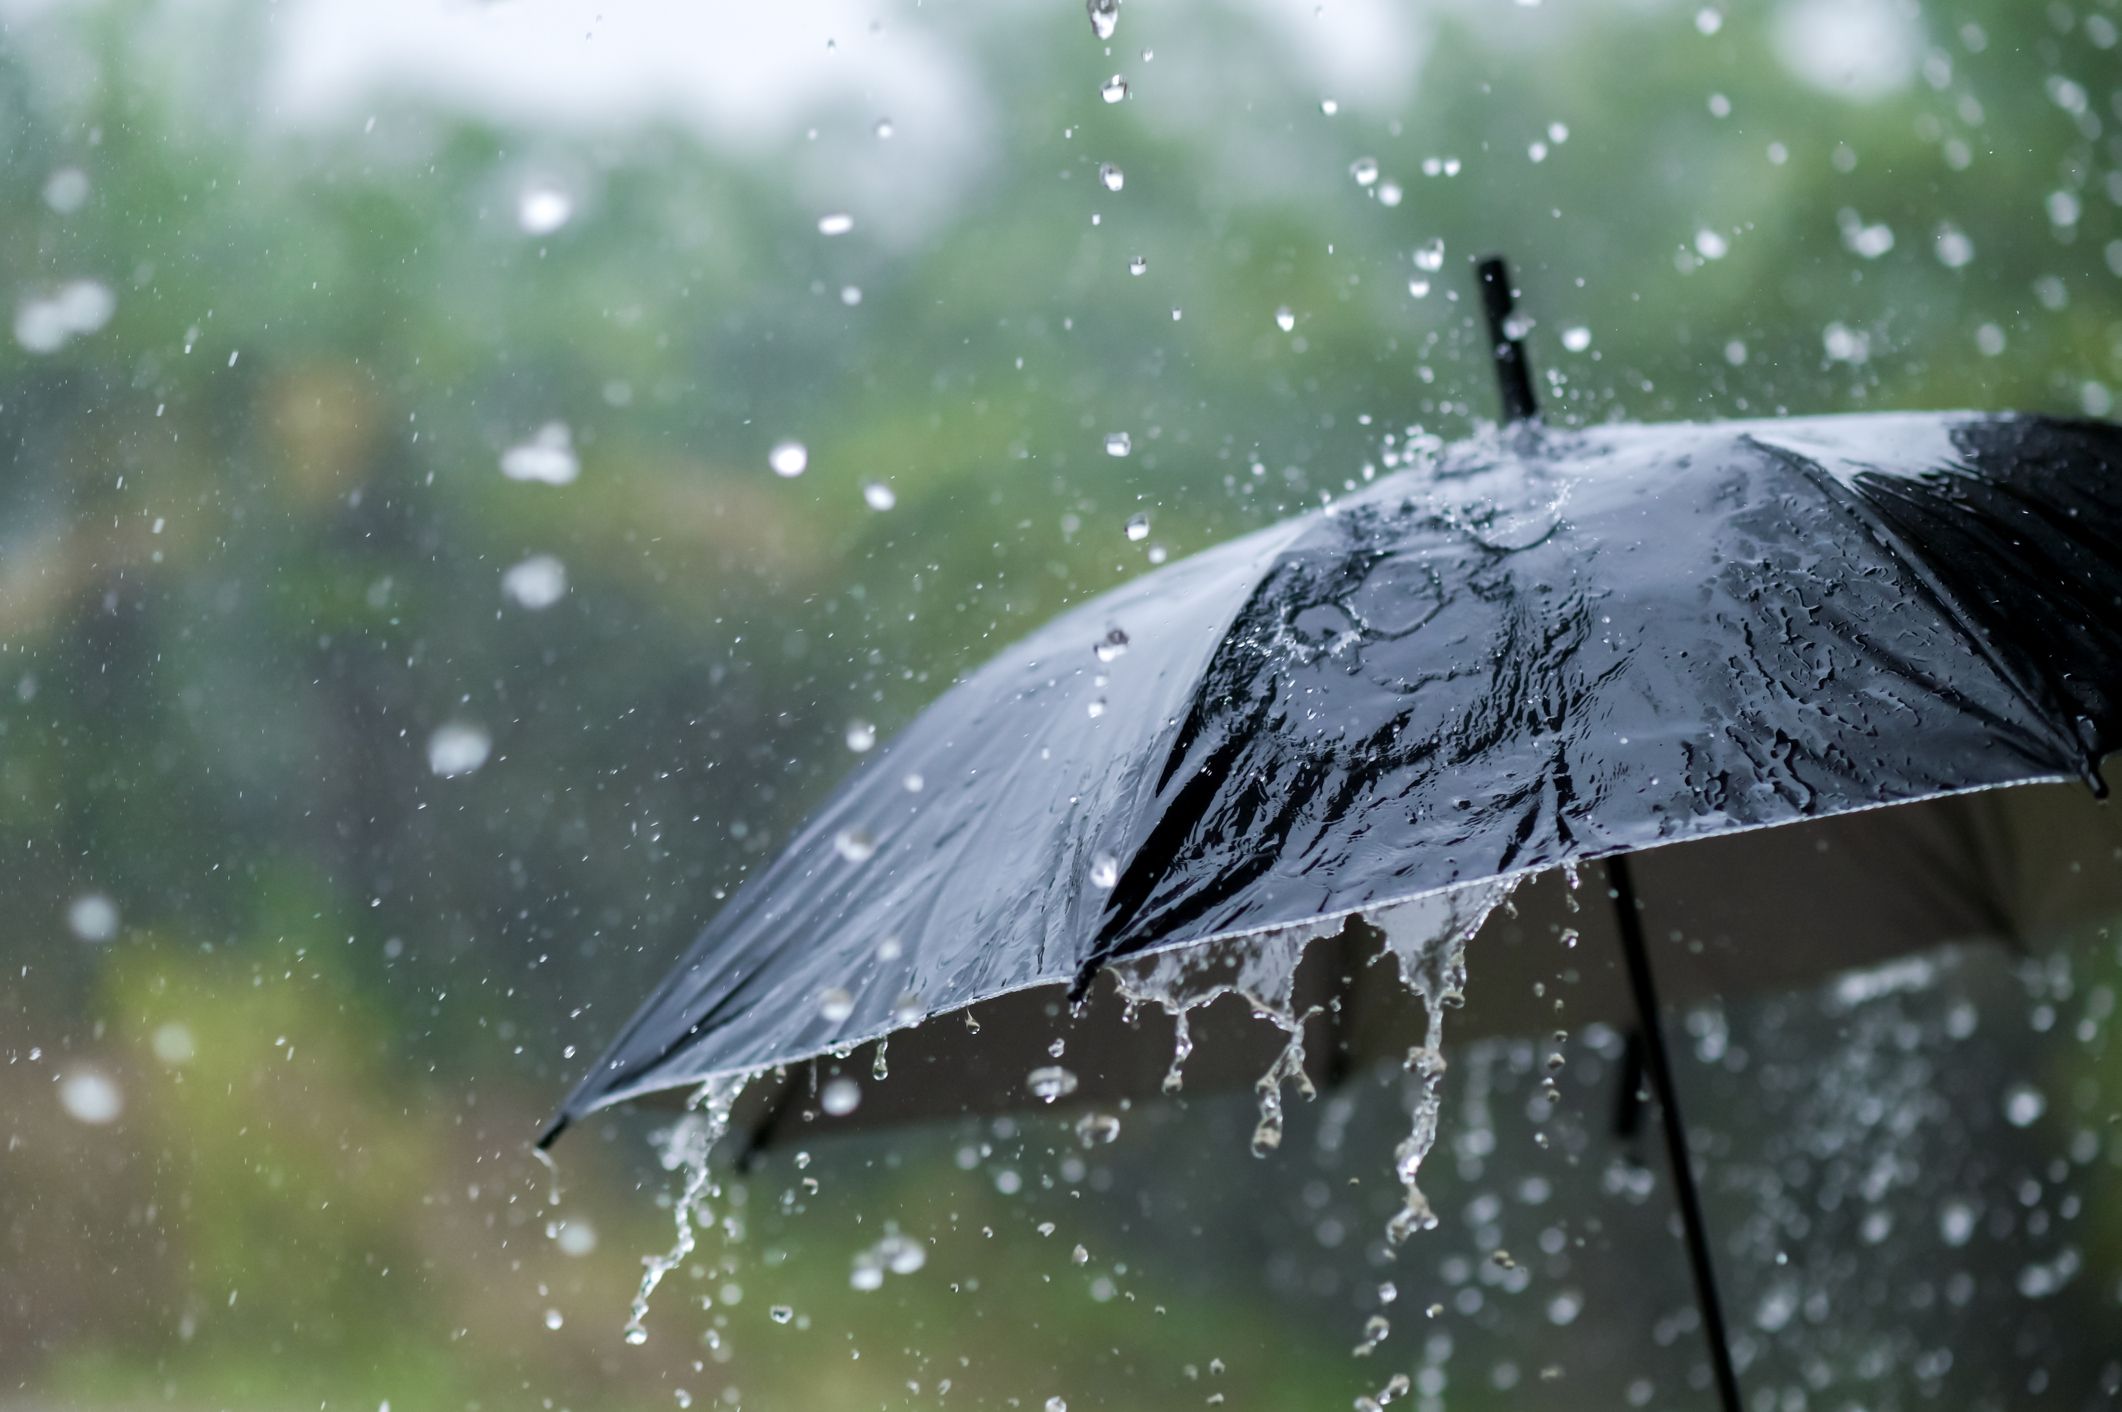 its-raining-heavily-wearing-an-umbrella-during-the-royalty-free-image-1660153348